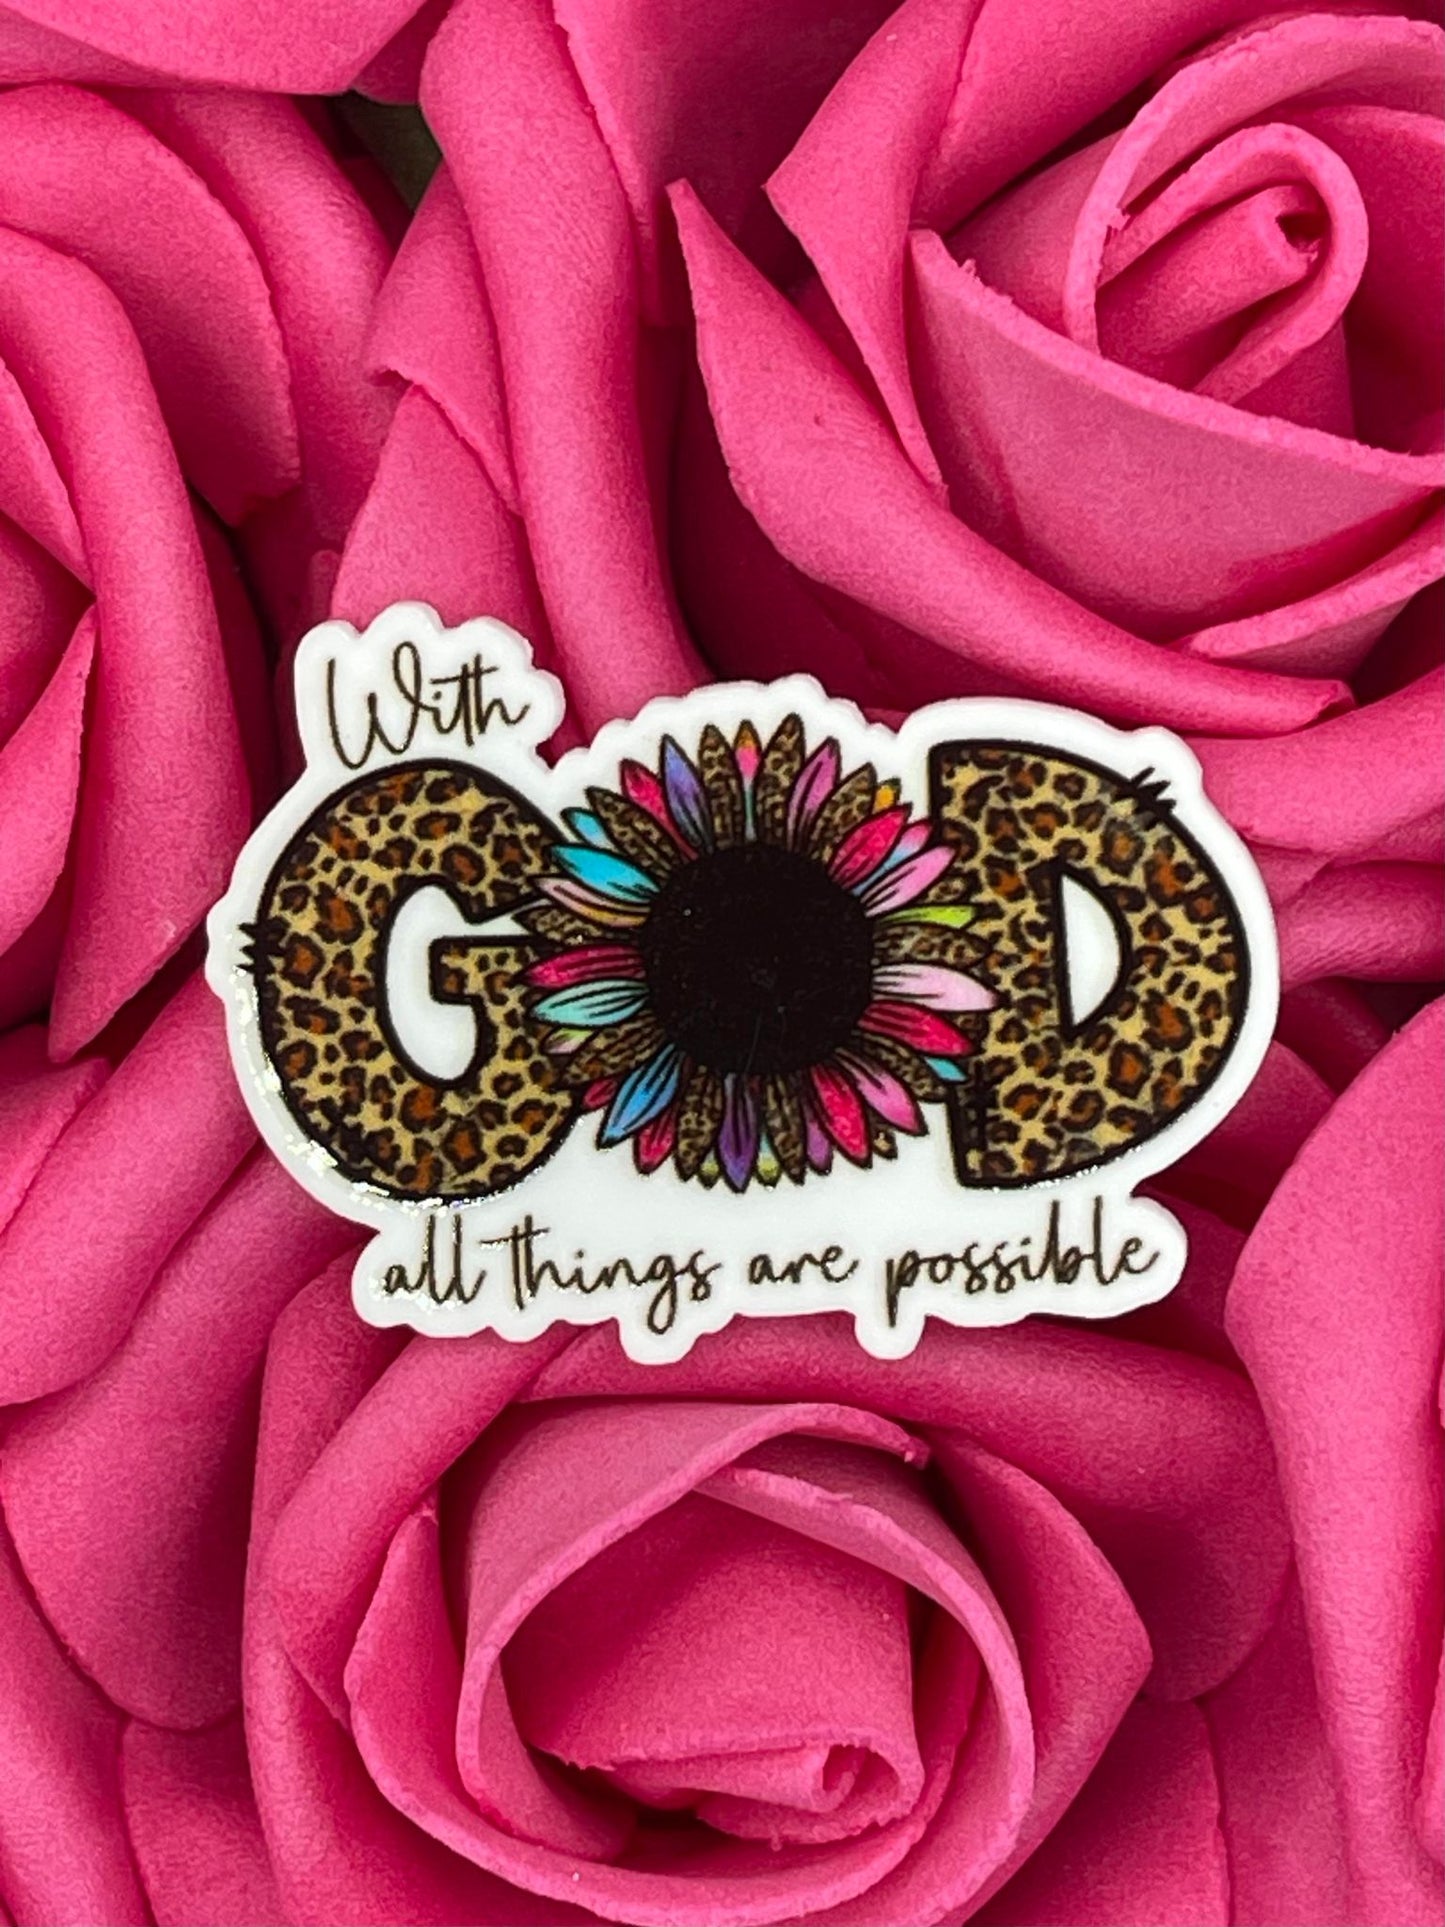 #1432 with GOD colorful flower